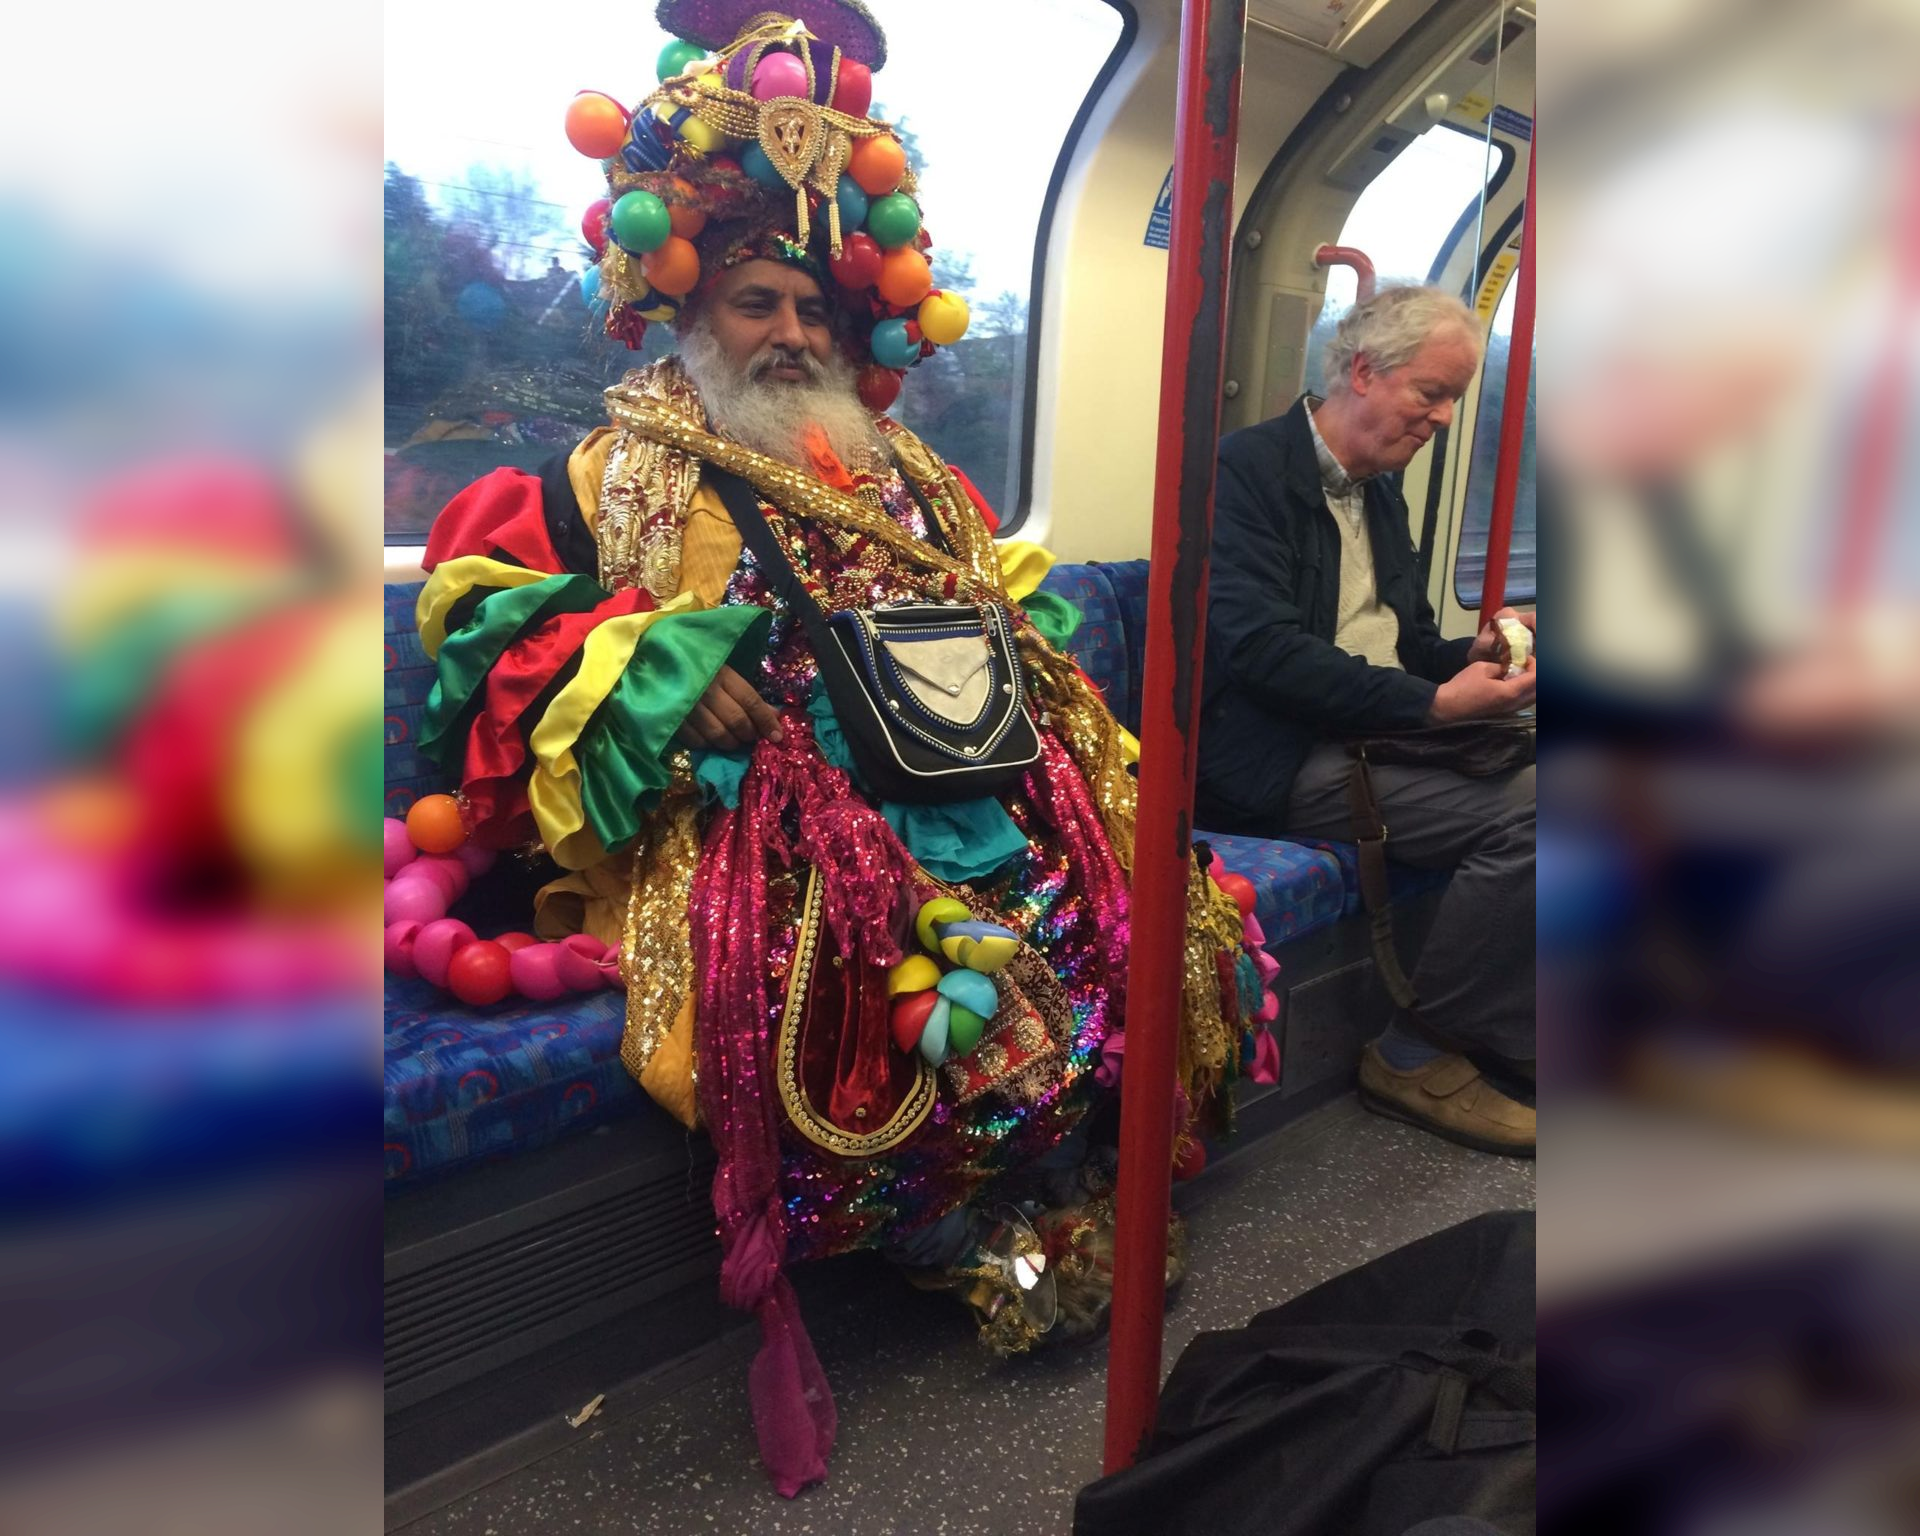 Subway Stories: Eccentric Personalities in Transit